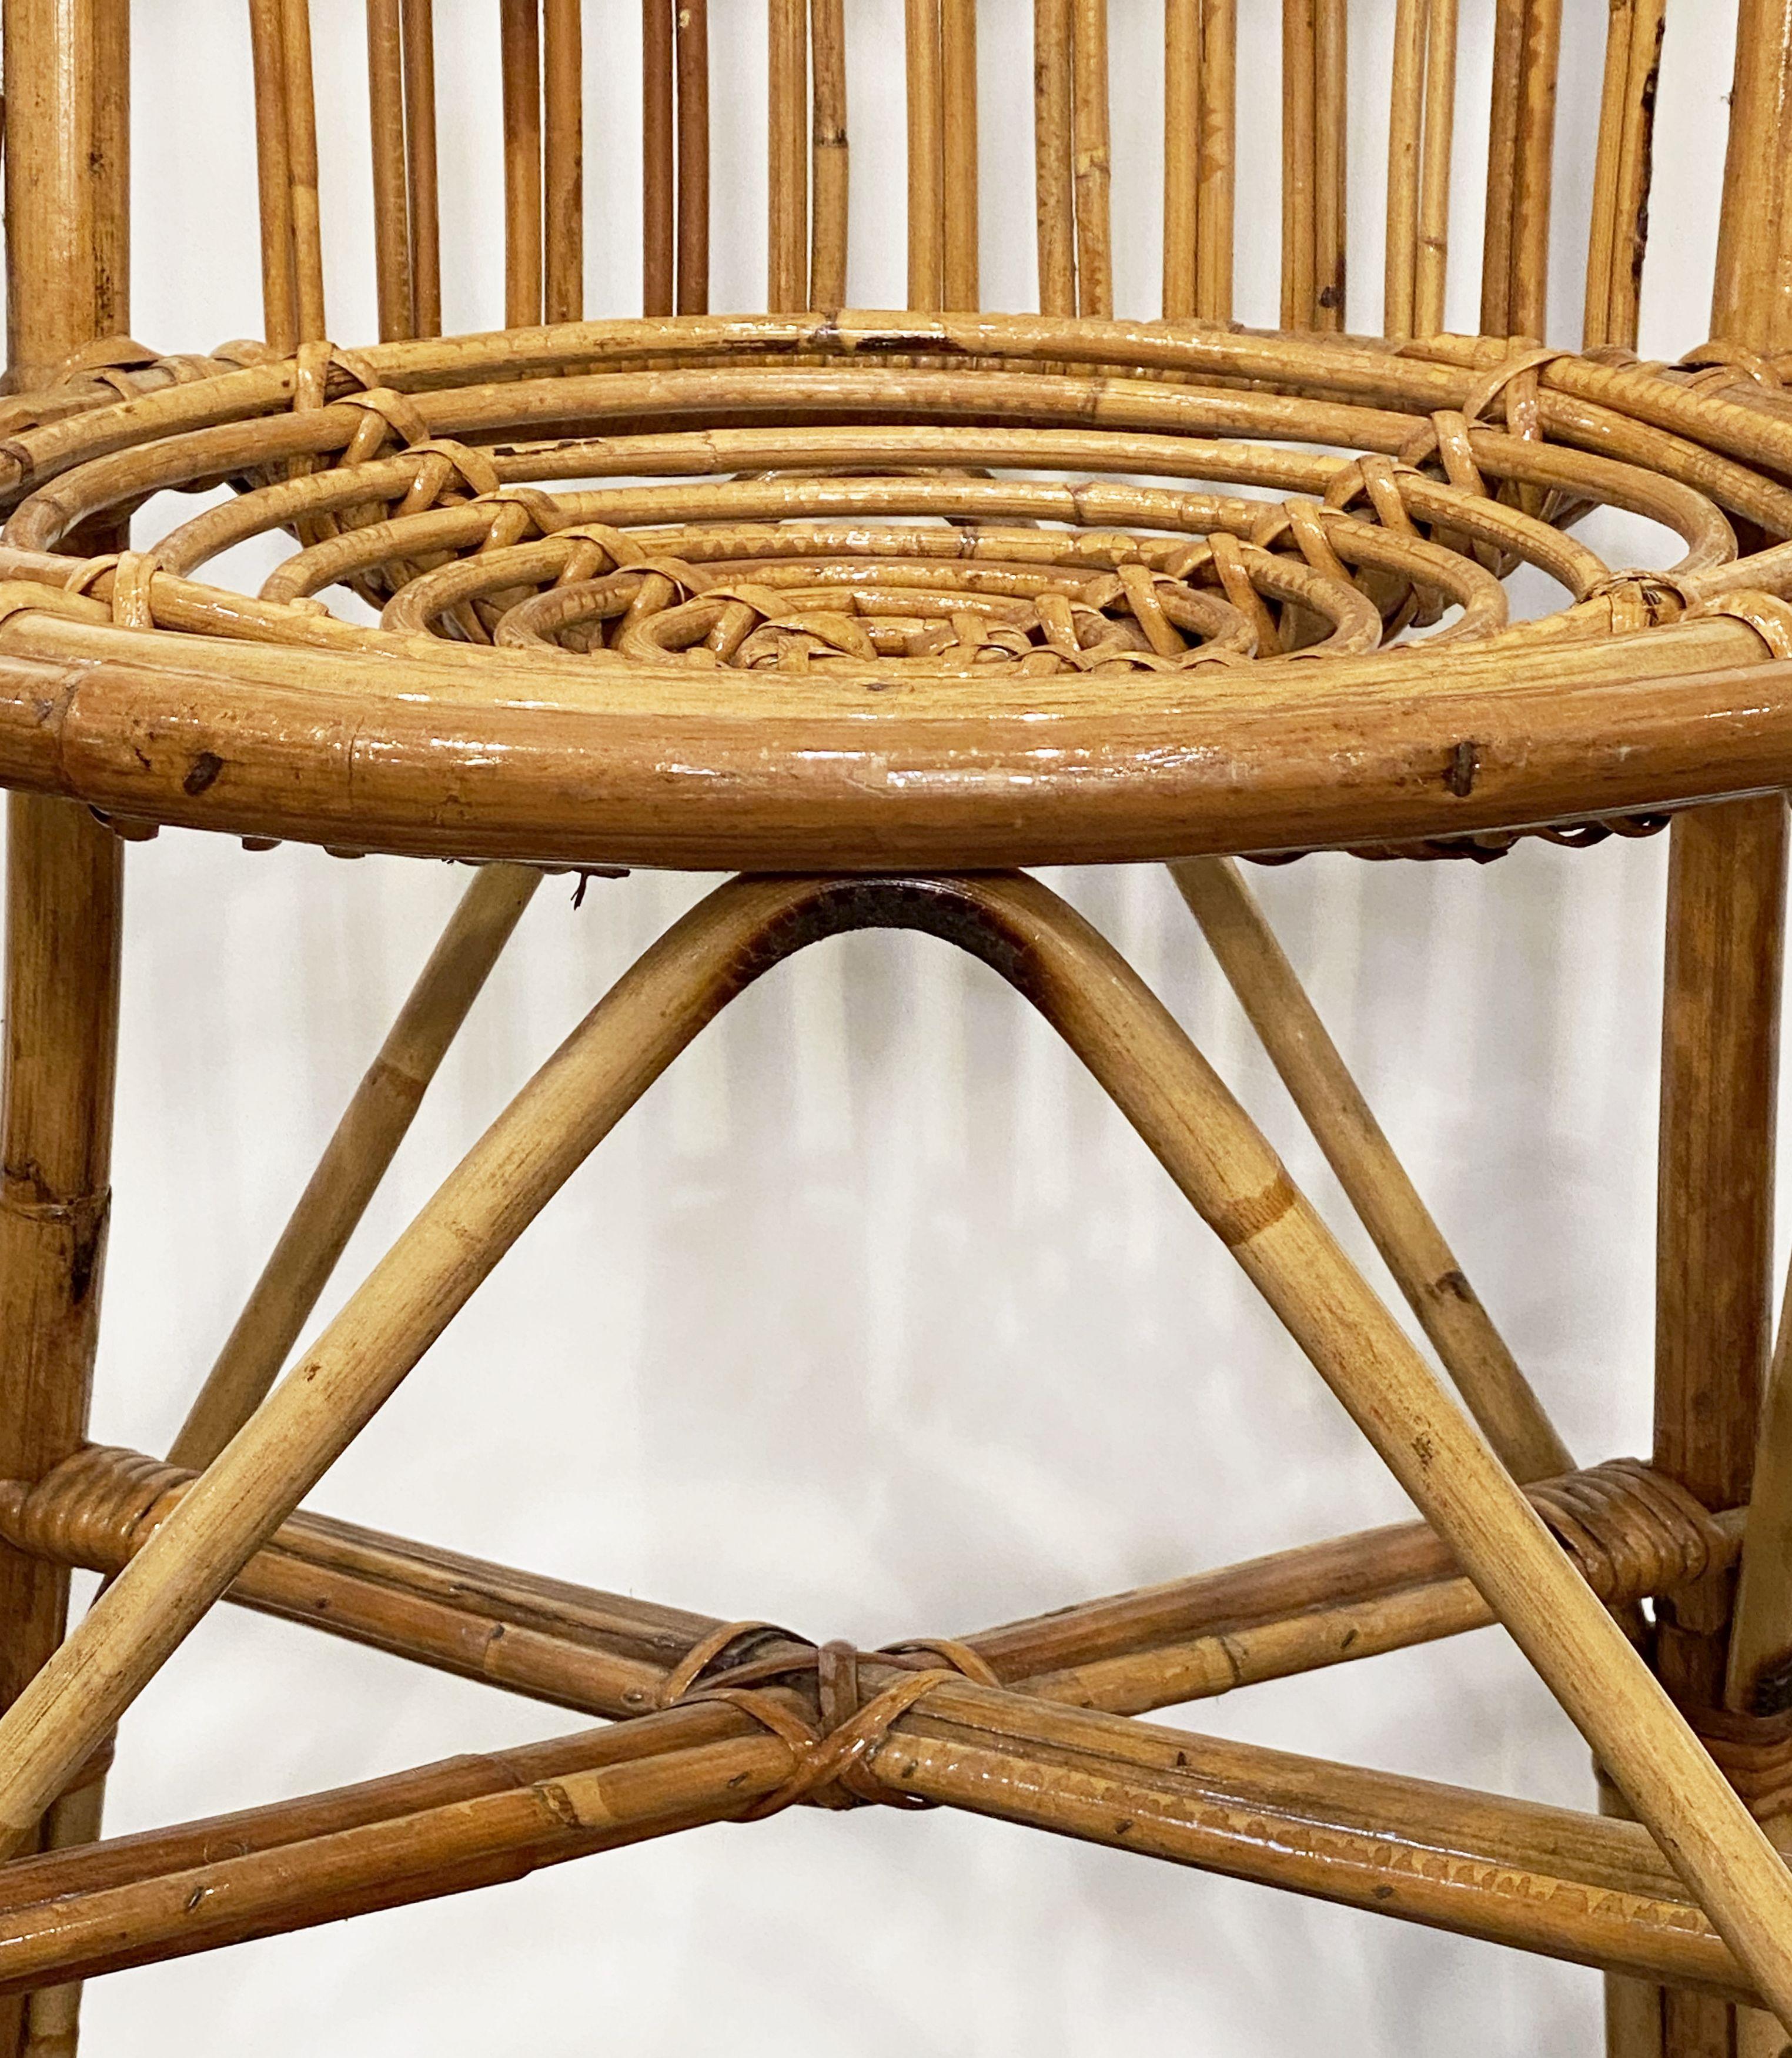 Italian Fan-Backed Chair of Rattan and Bamboo from the Mid-20th Century For Sale 6